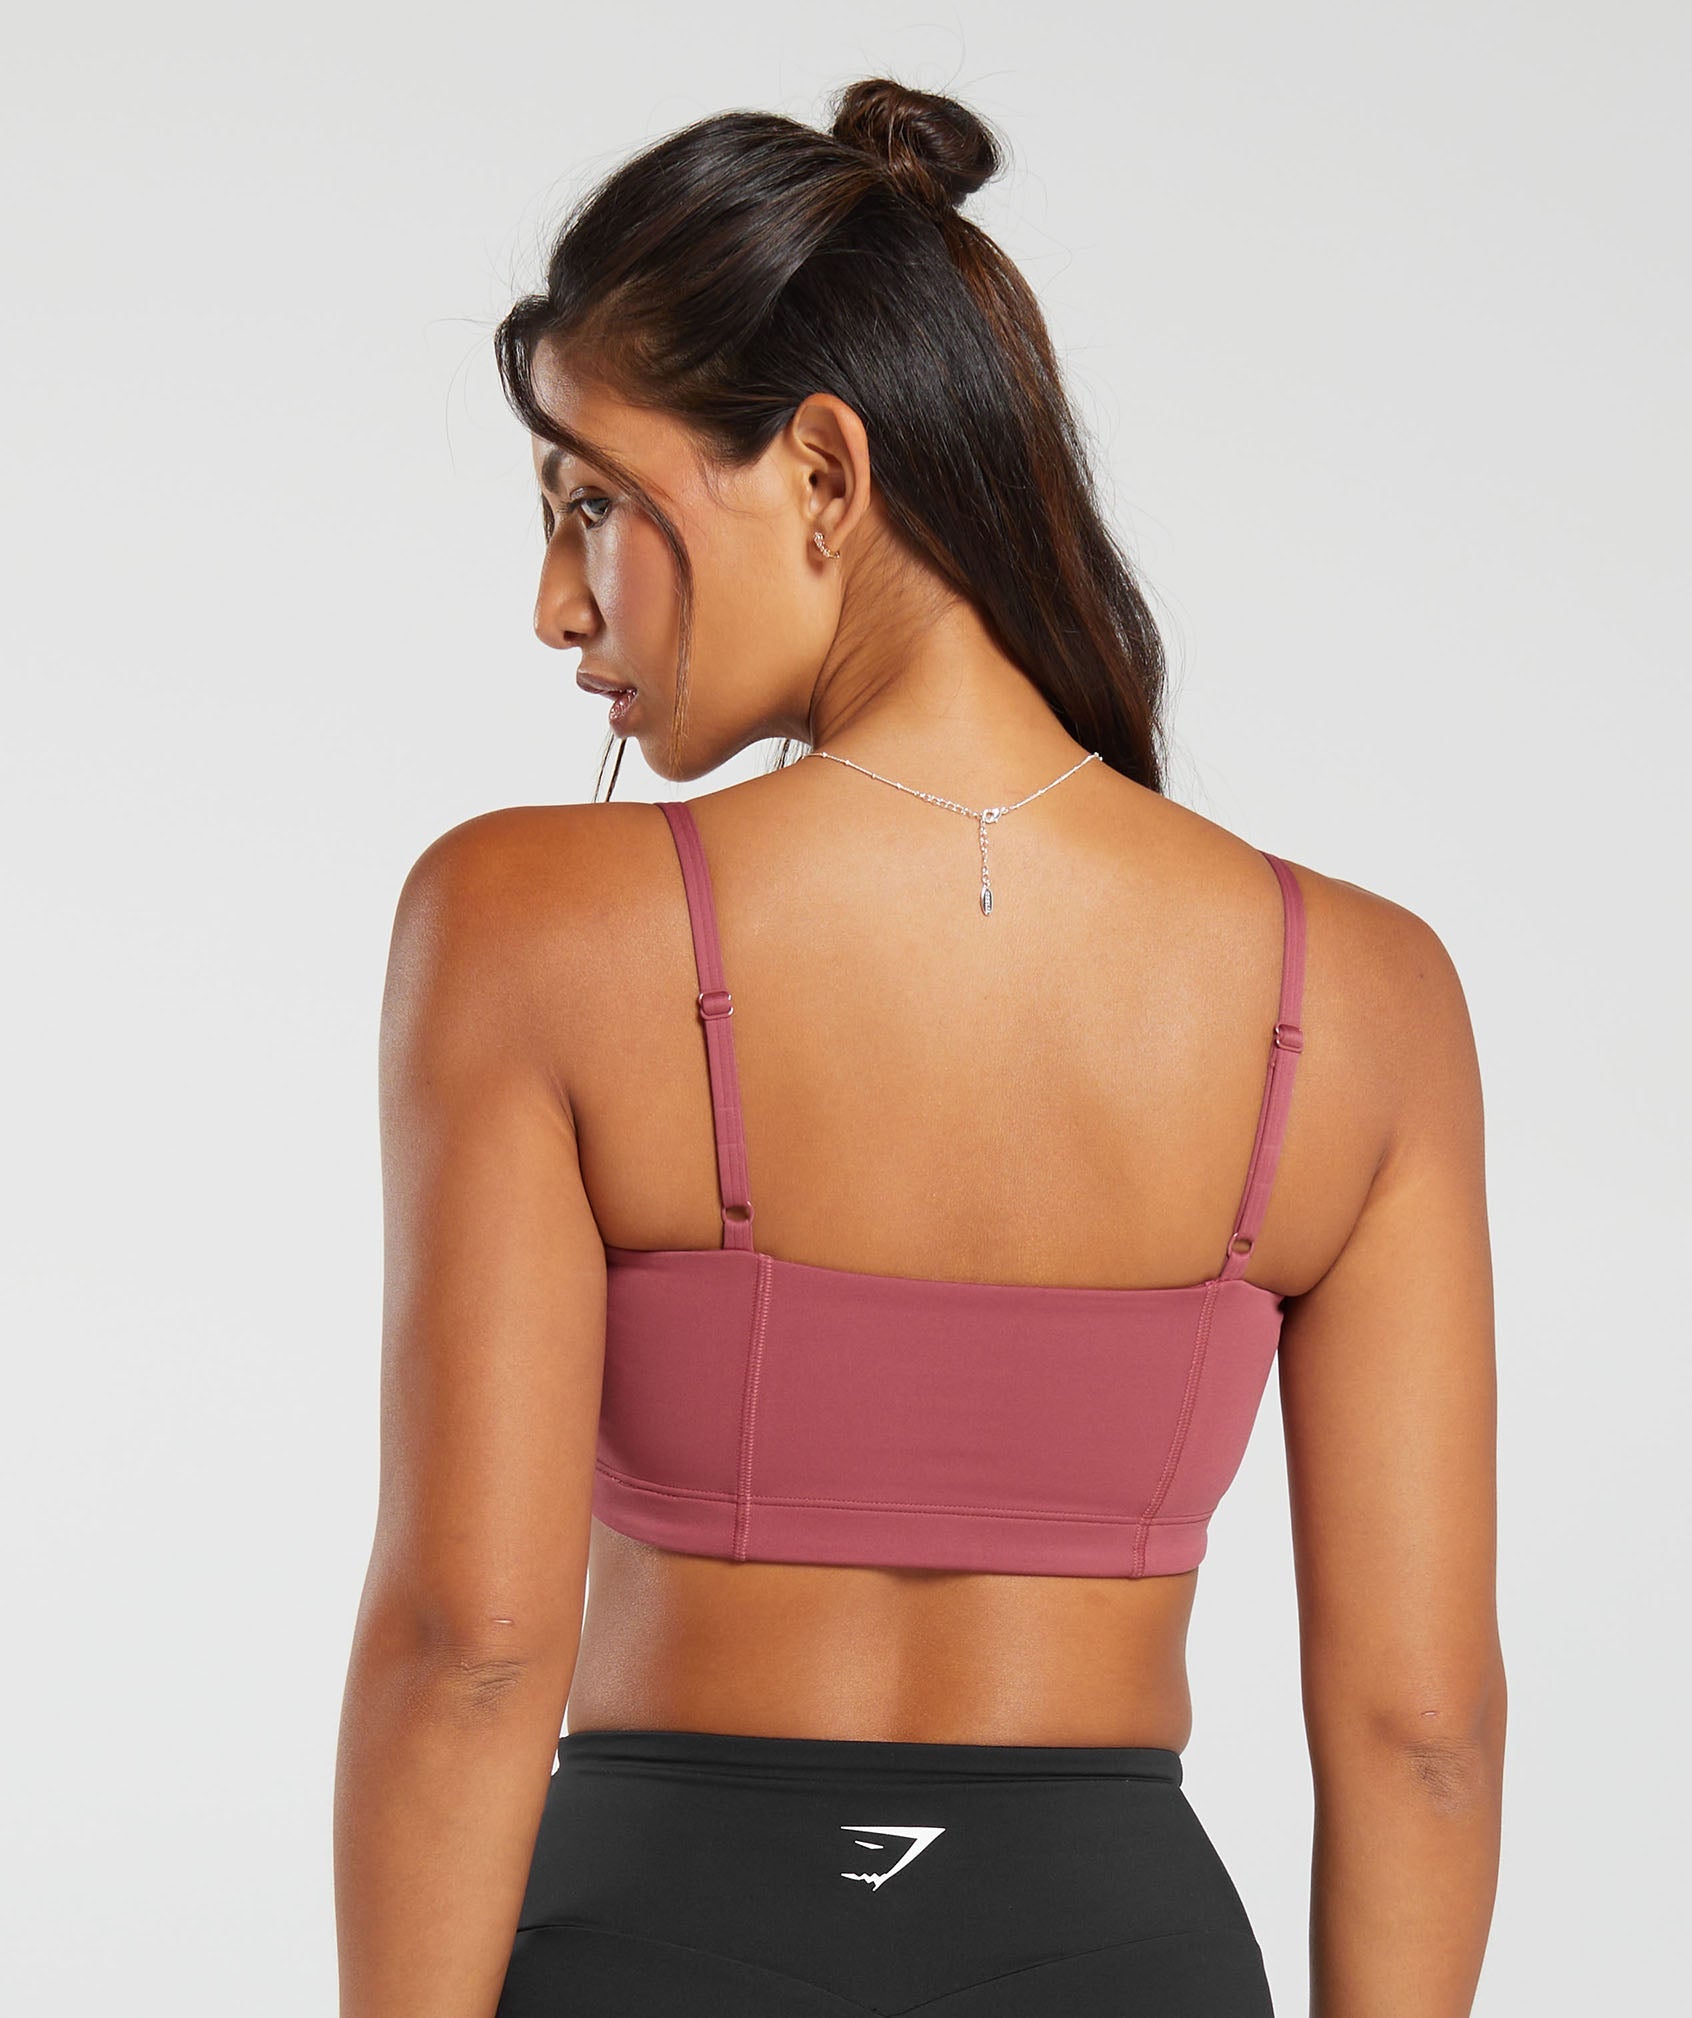 Bandeau Sports Bra in Soft Berry - view 2